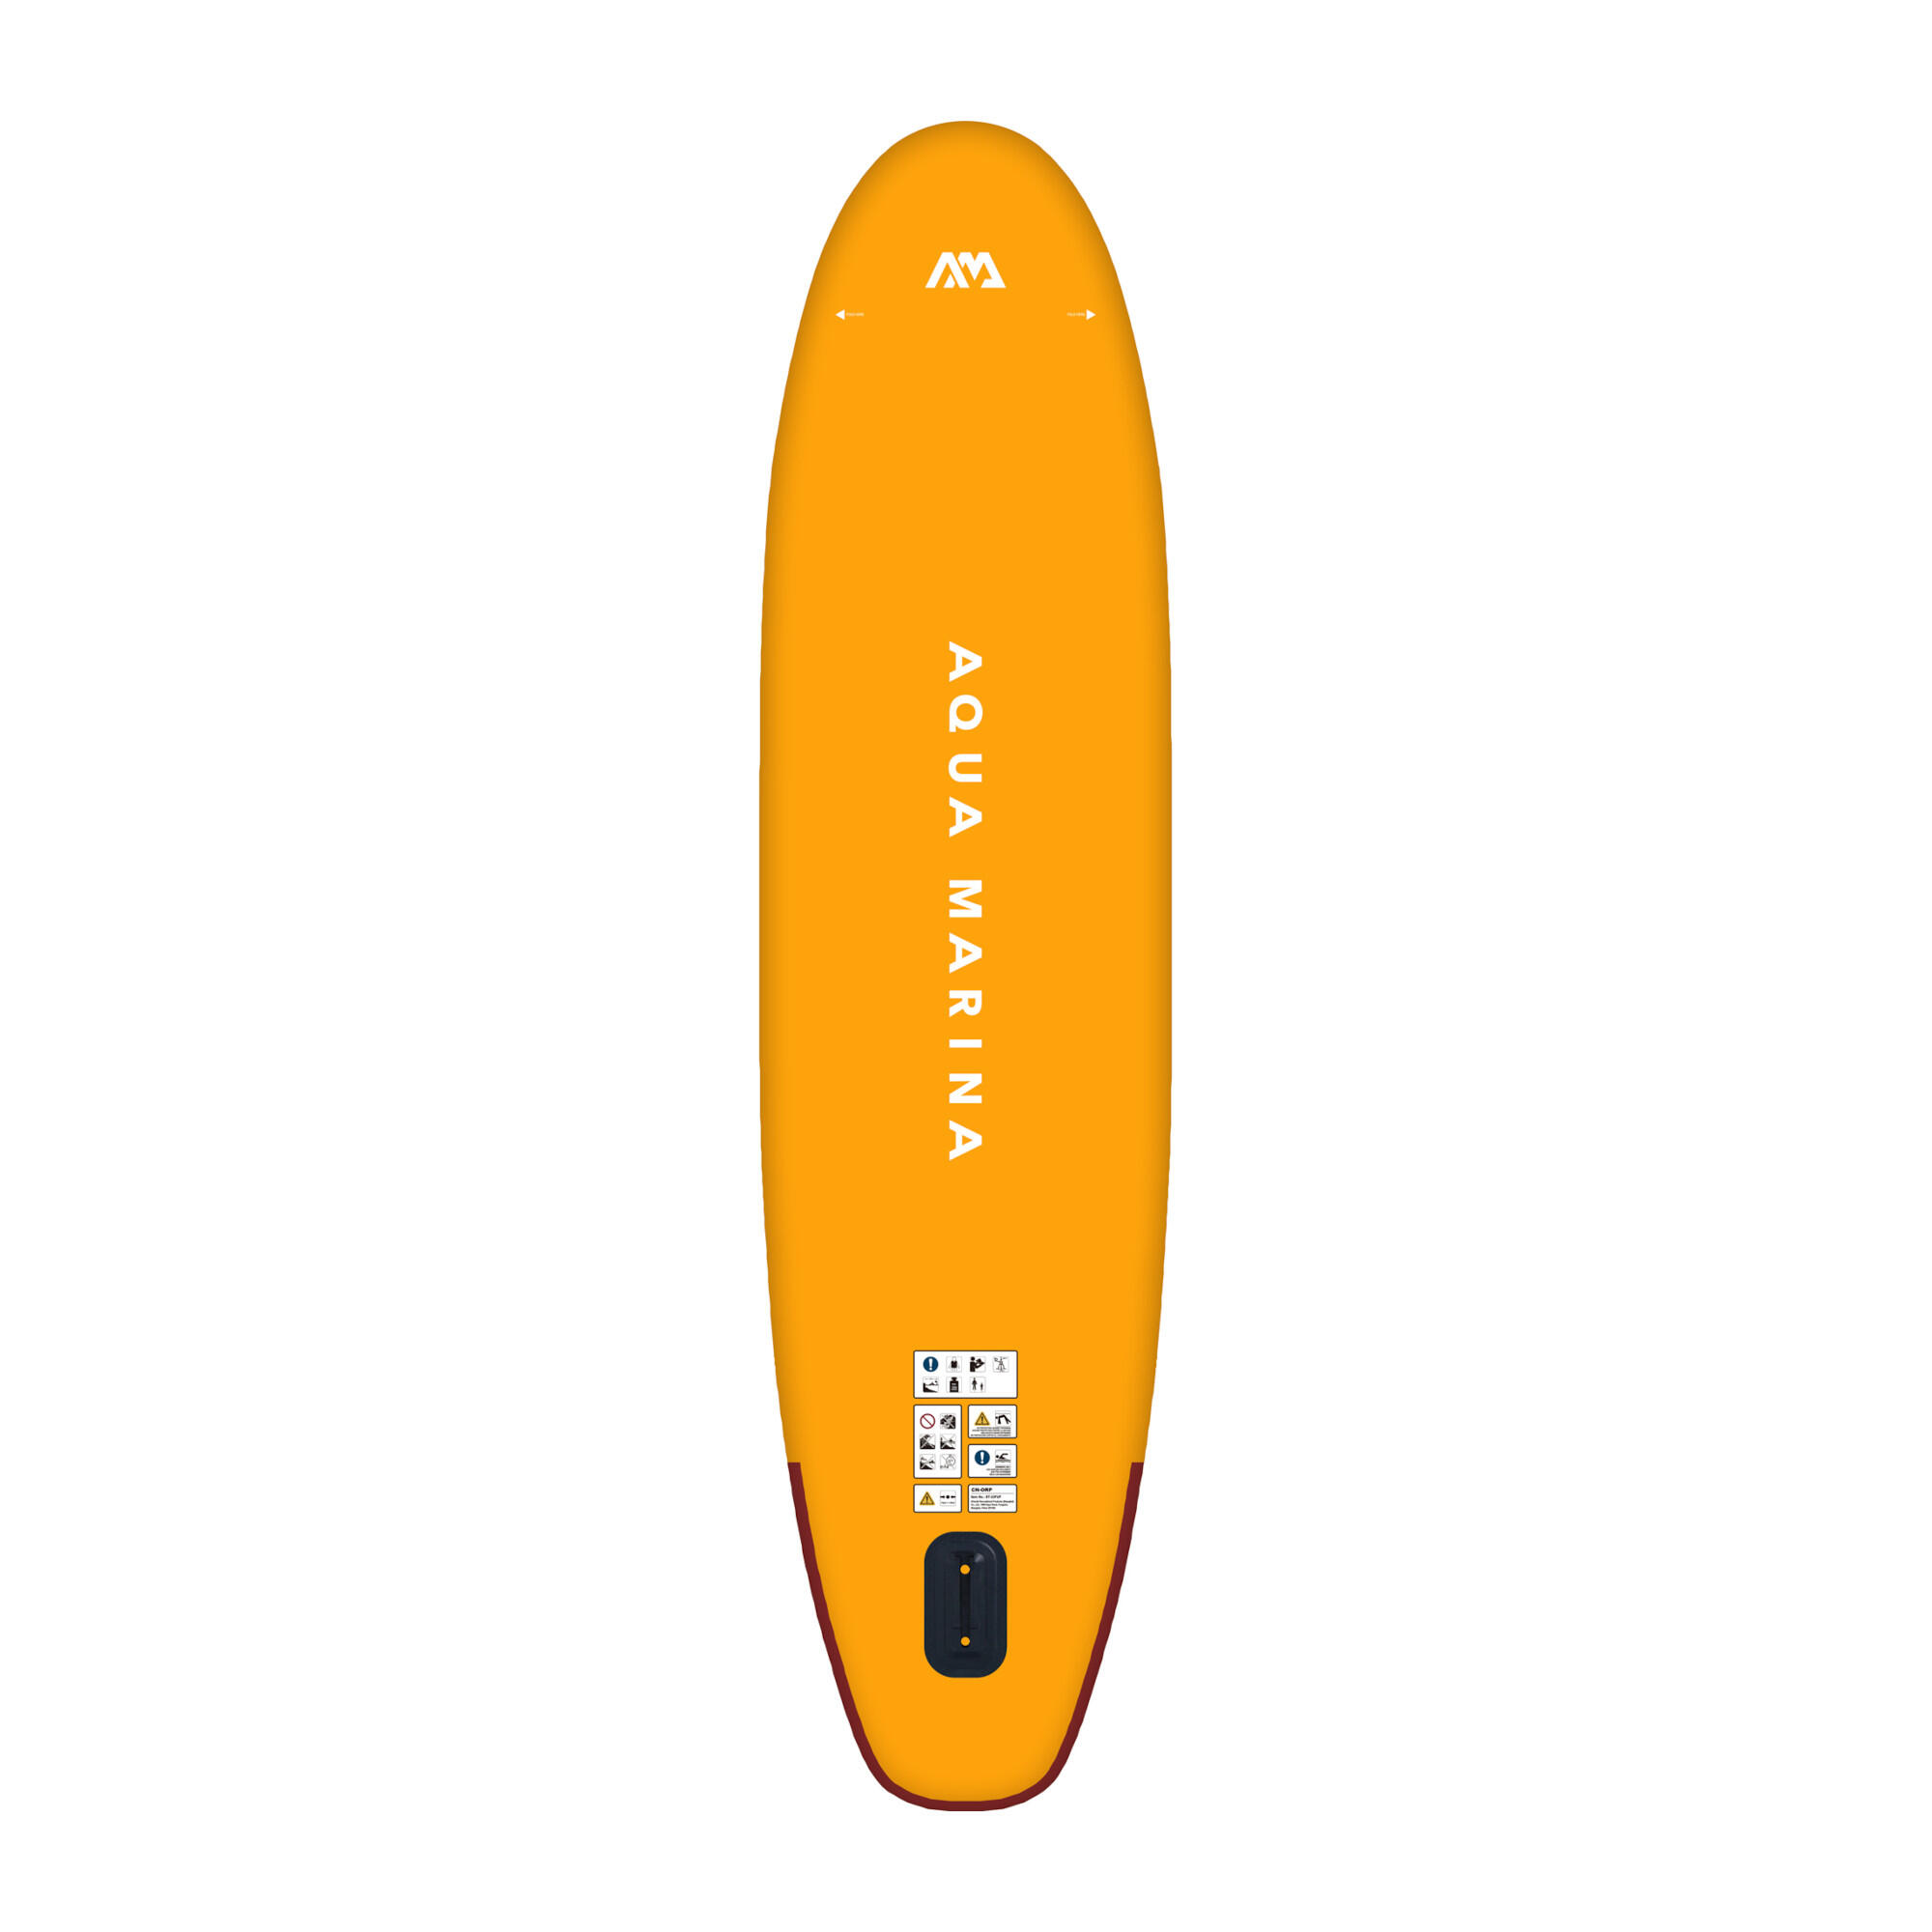 Aqua Marina Fusion stand-up paddle board package 10ft10/330cm 2/15